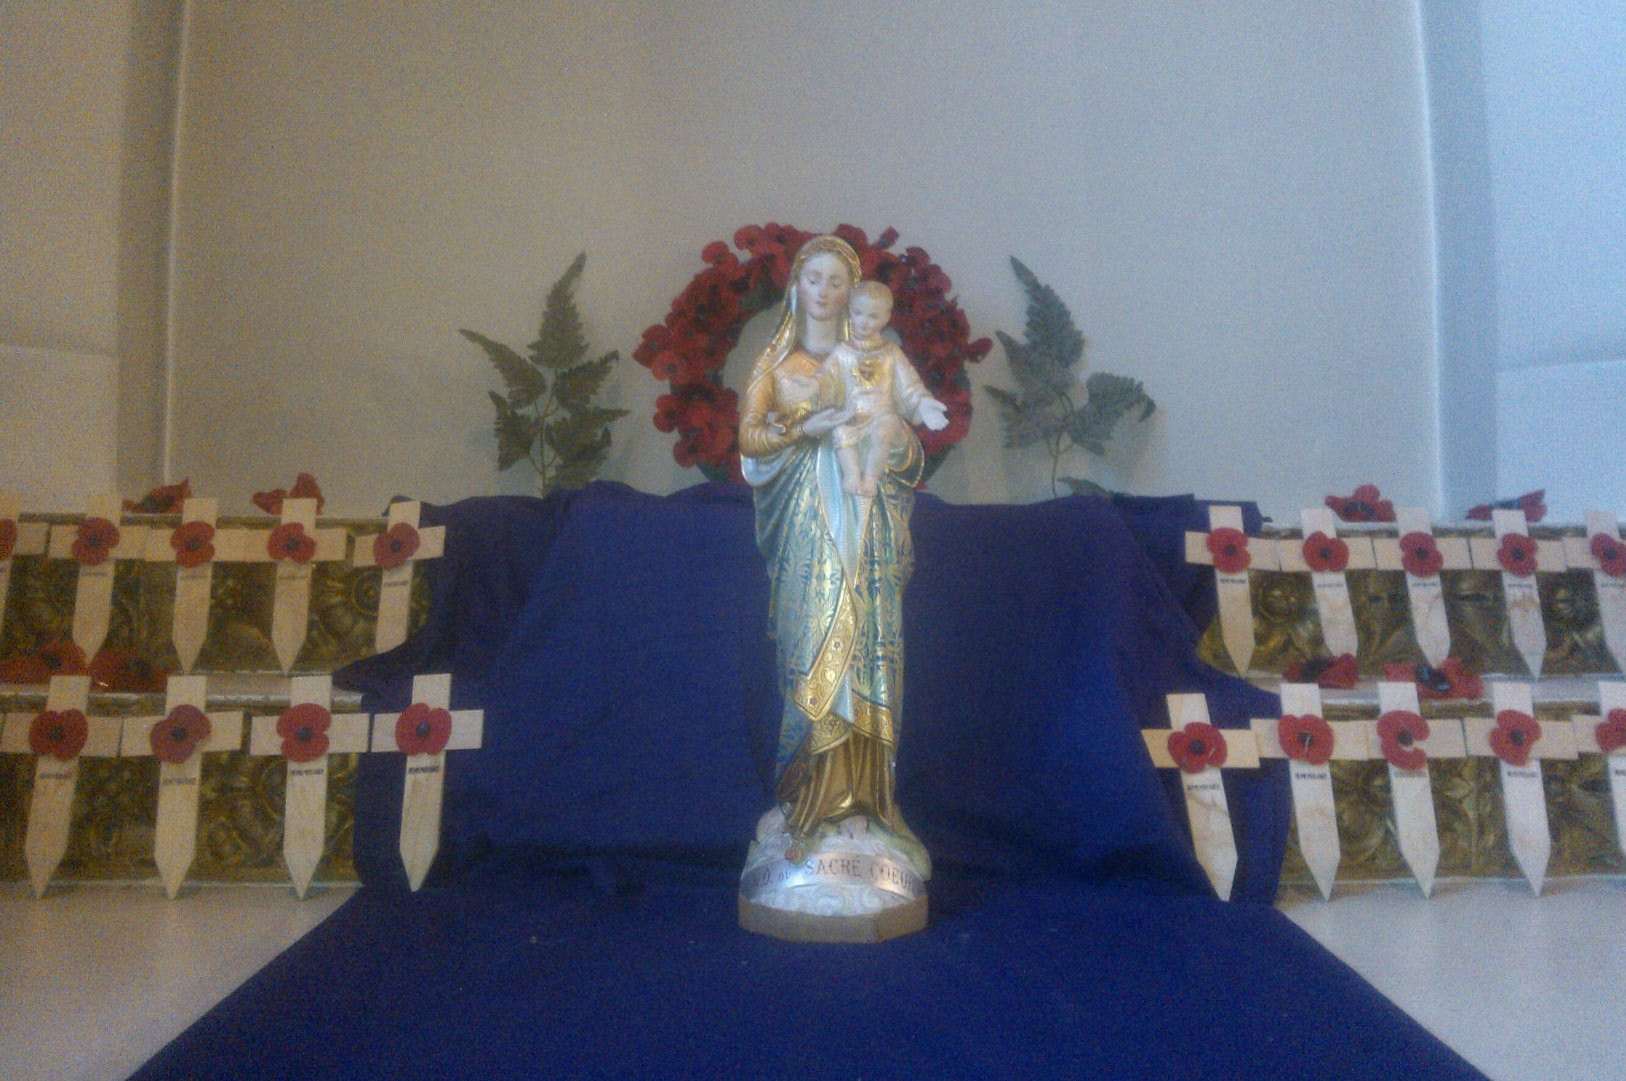 The statue of the Virgin Mary in its remembrance grotto